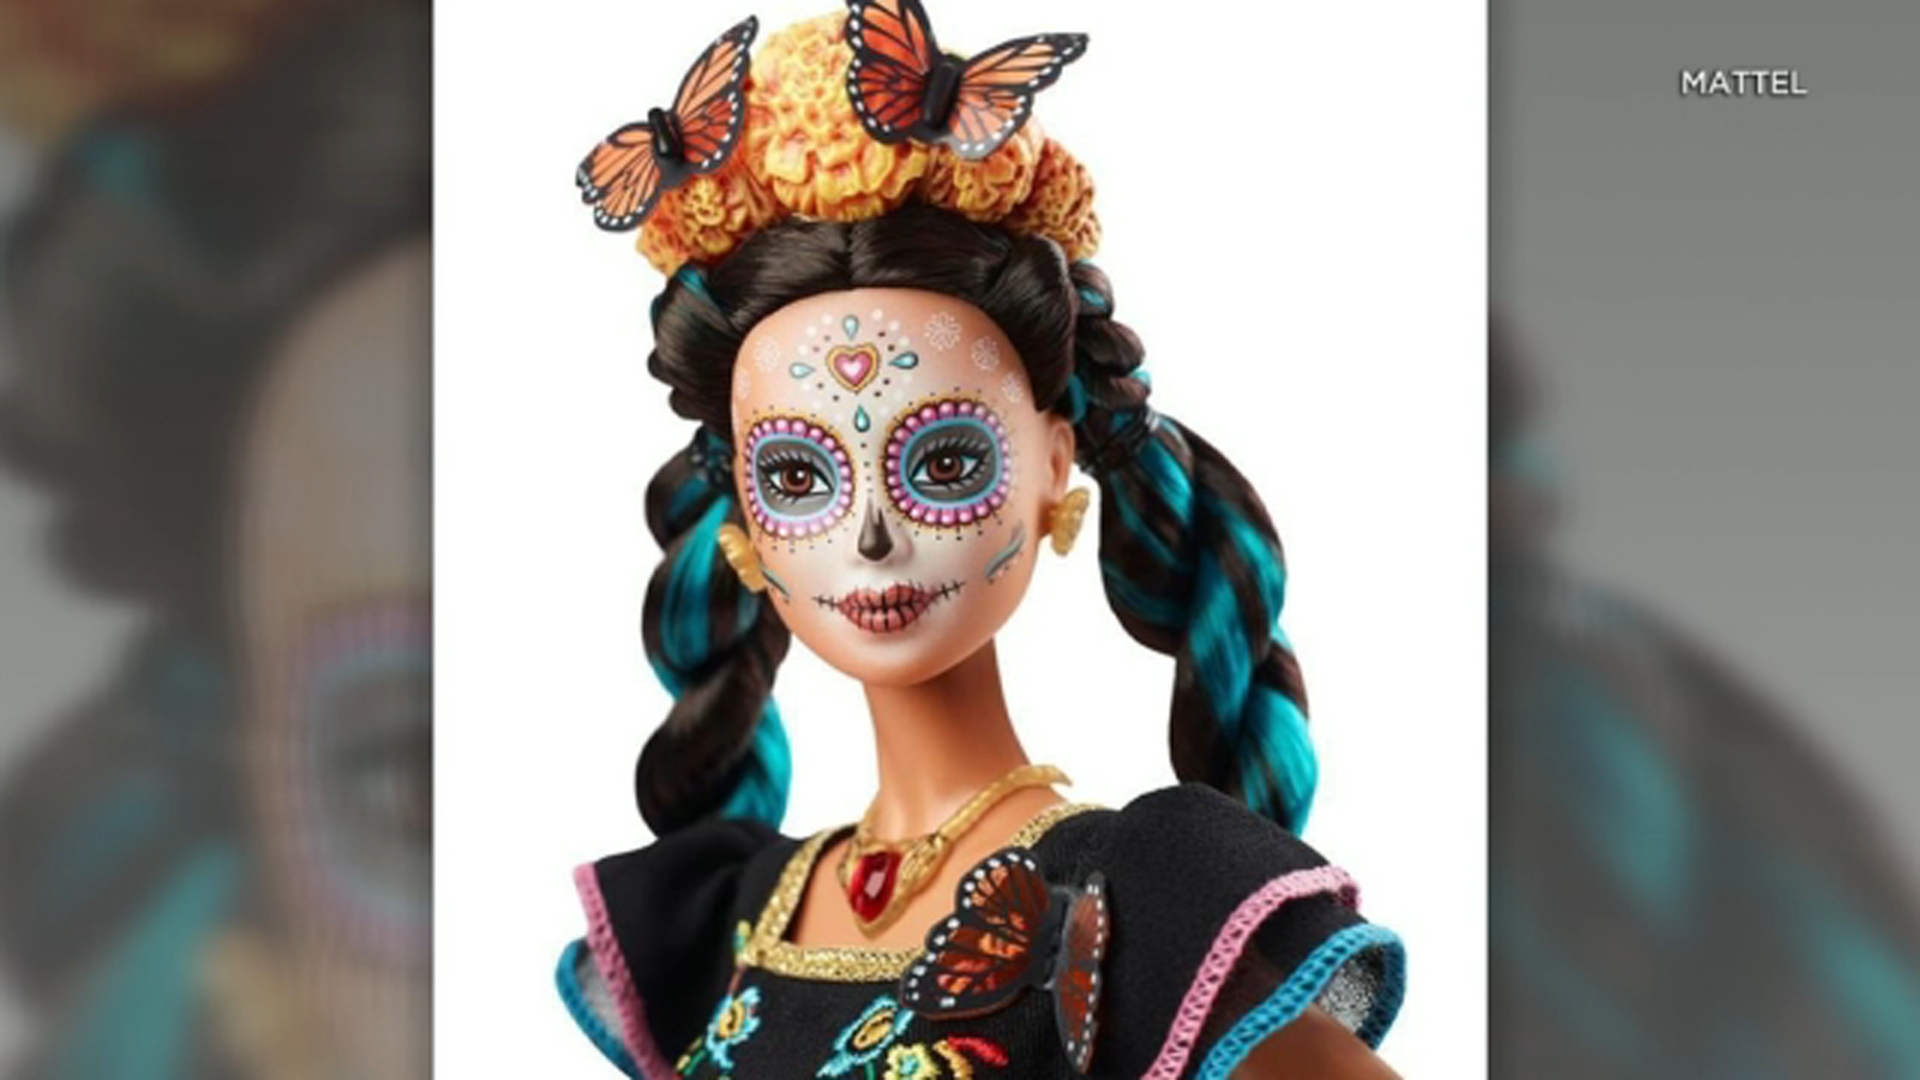 target day of the dead barbie doll